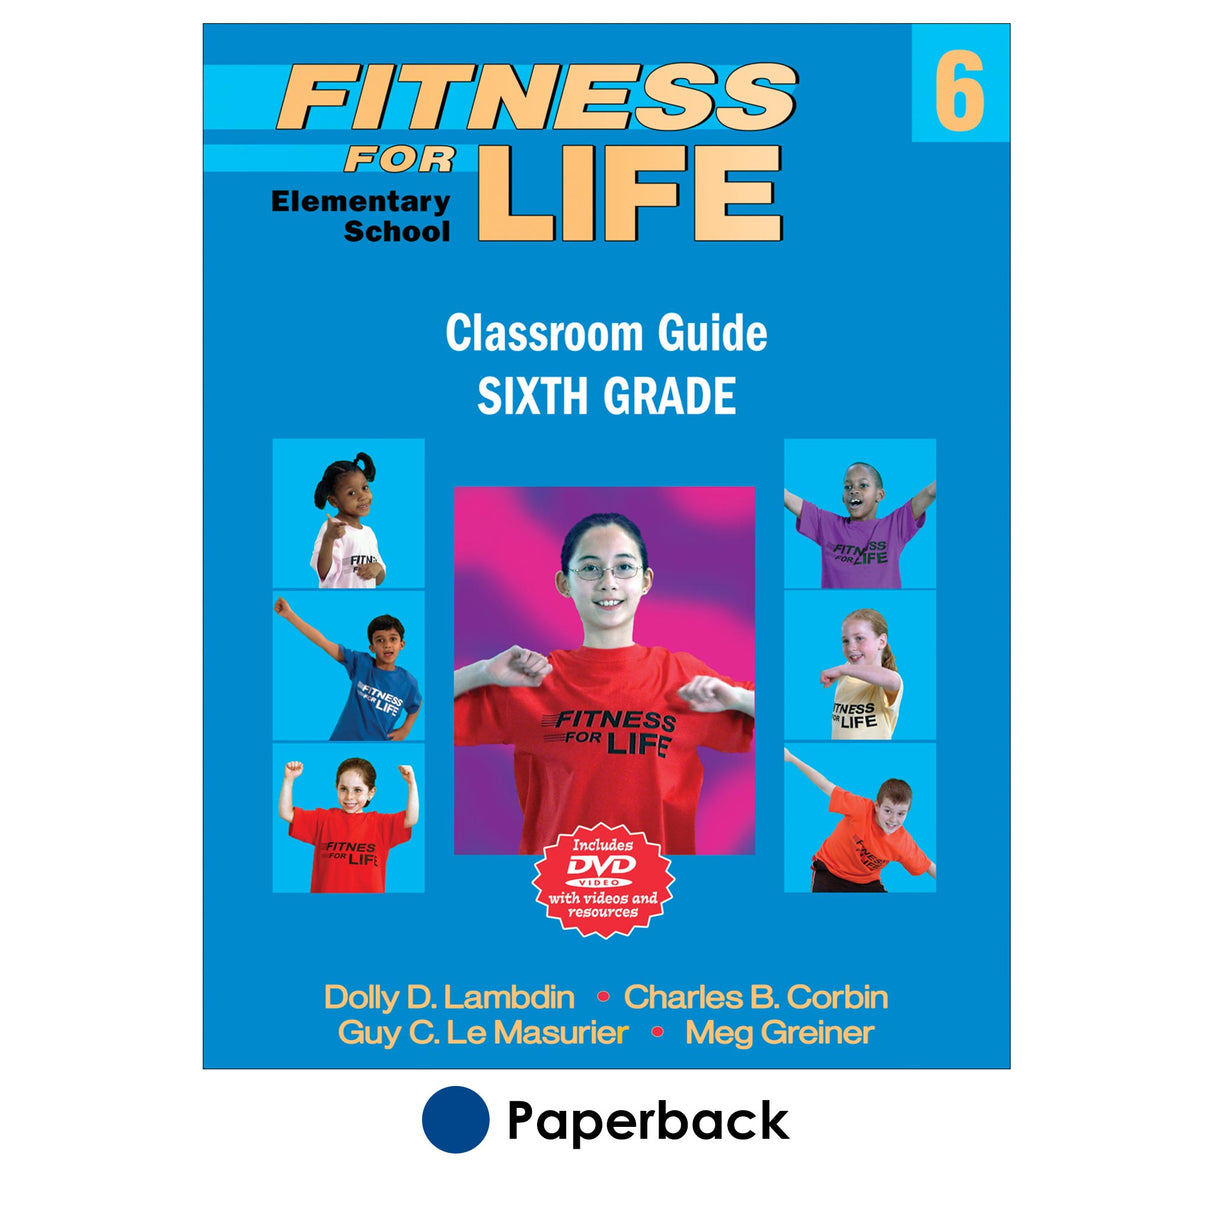 Fitness for Life Elementary School Classroom Guide: Sixth Grade